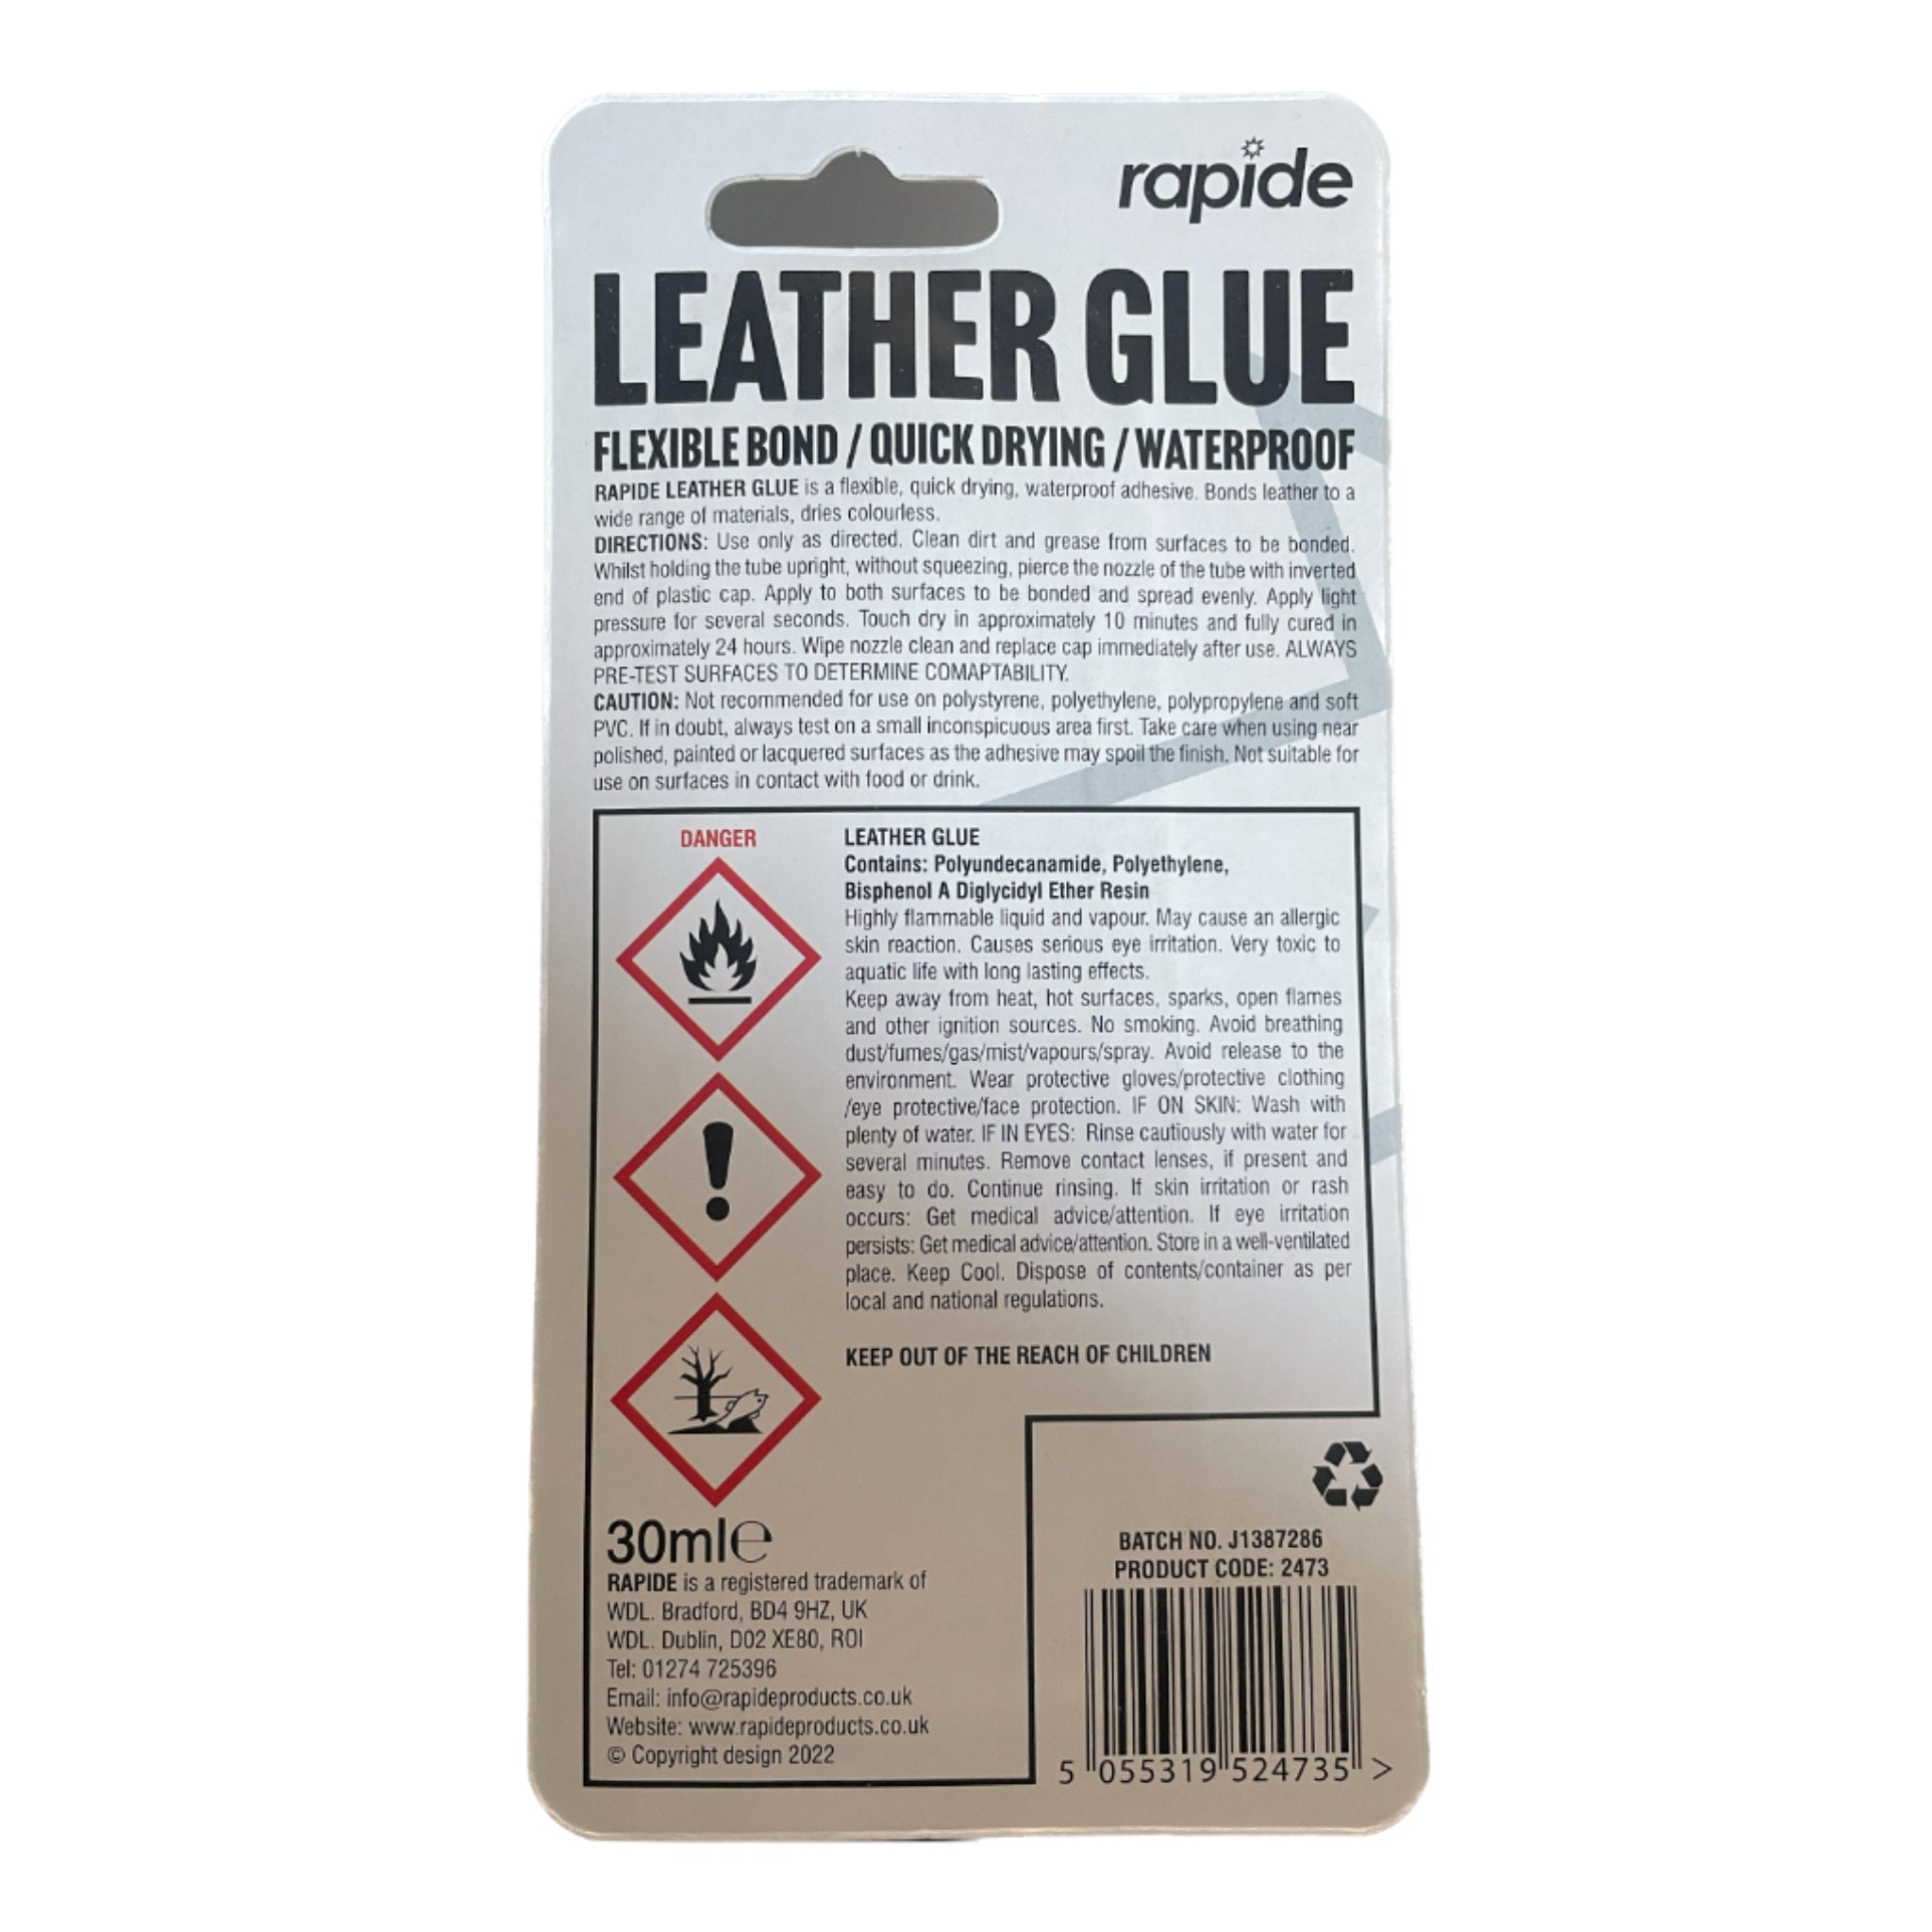 Beclen Harp Permanent Shoe Repair Water Resistant Clear Adhesive Leather Rubber Glue 30ml/ Fixes Leather Shoes Trainer Boot